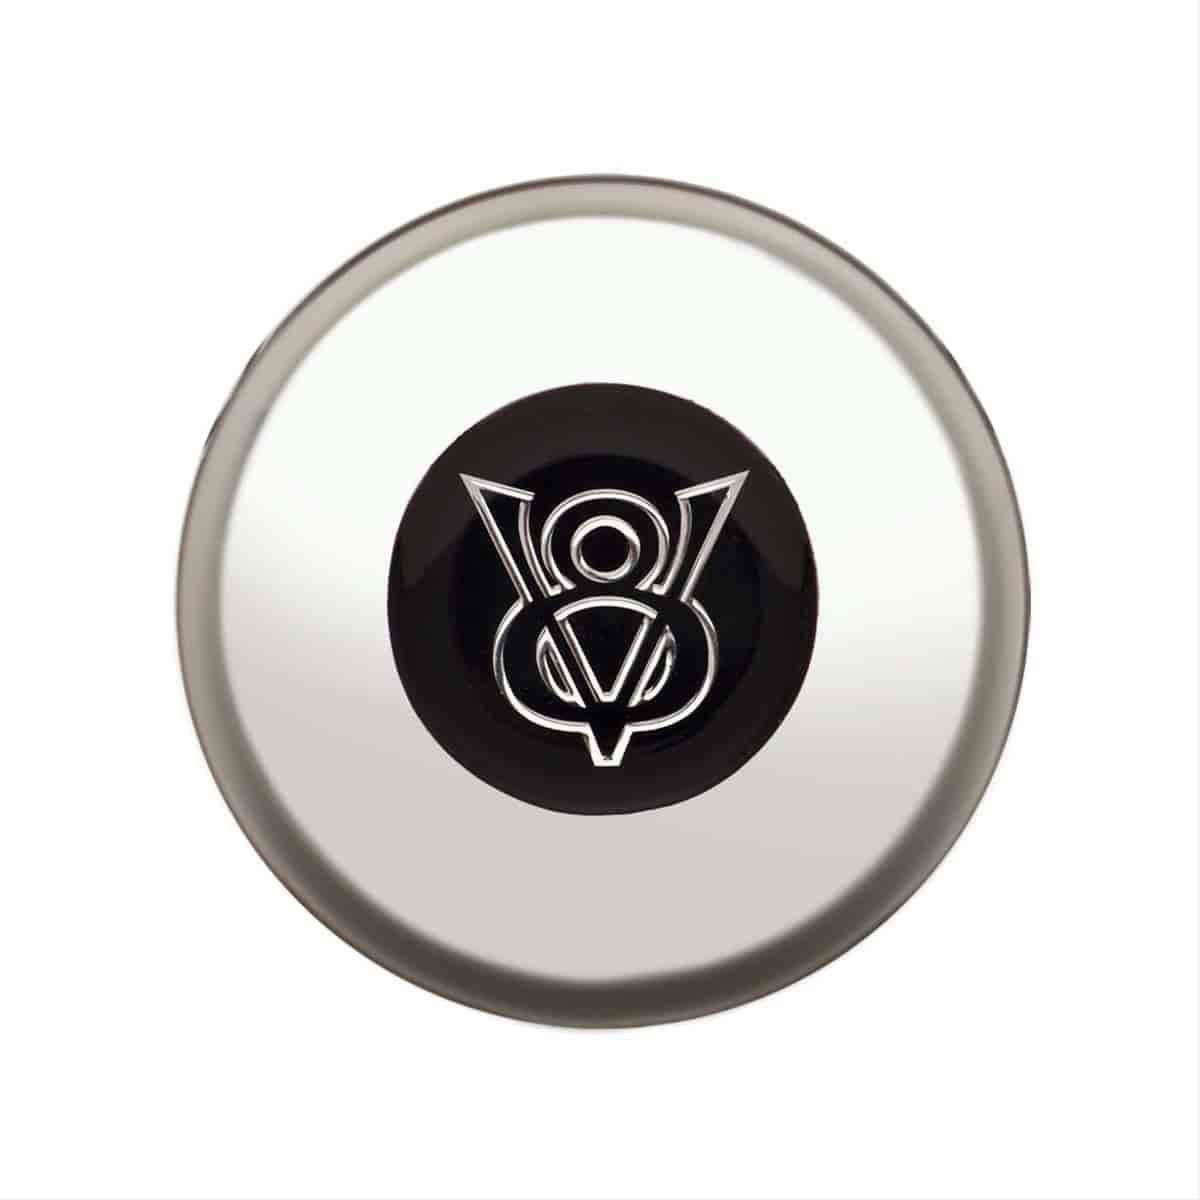 GT3 Gasser/Euro Style Horn Button "V8" Emblem Colored Smooth Style Polished with Black Center